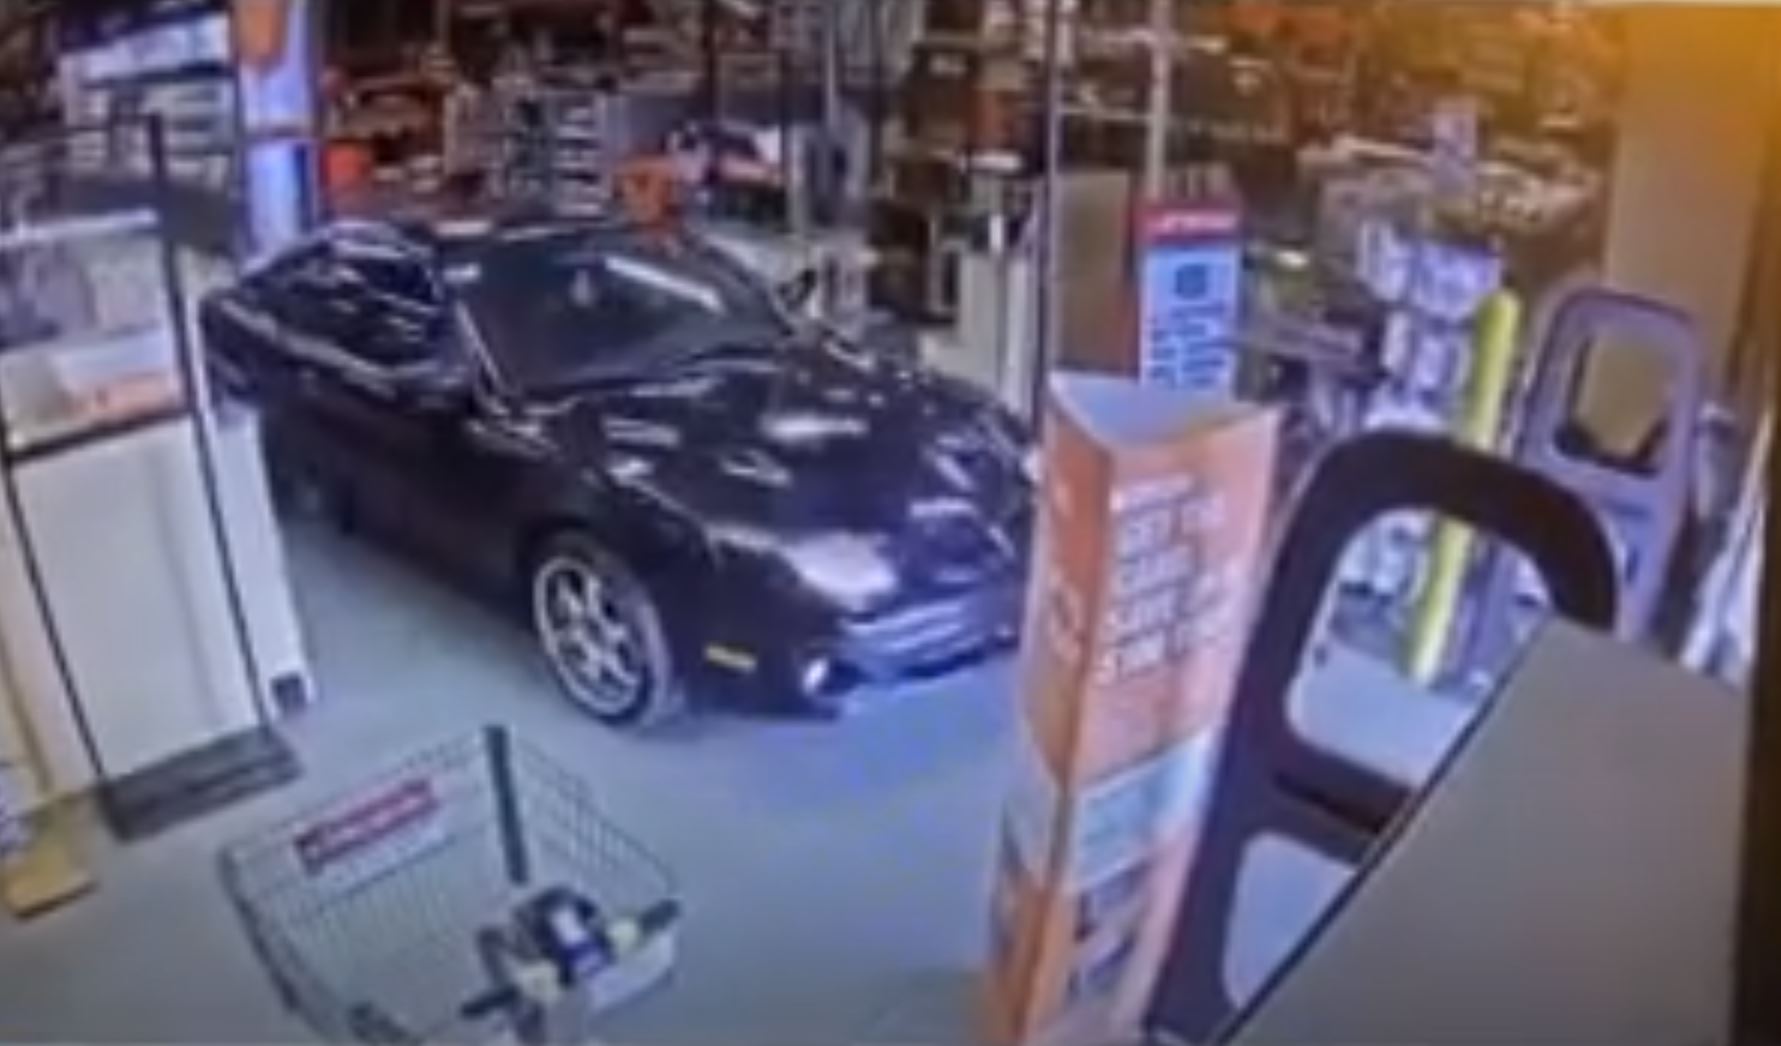 Video released from inside Home Depot showing woman driving through doors